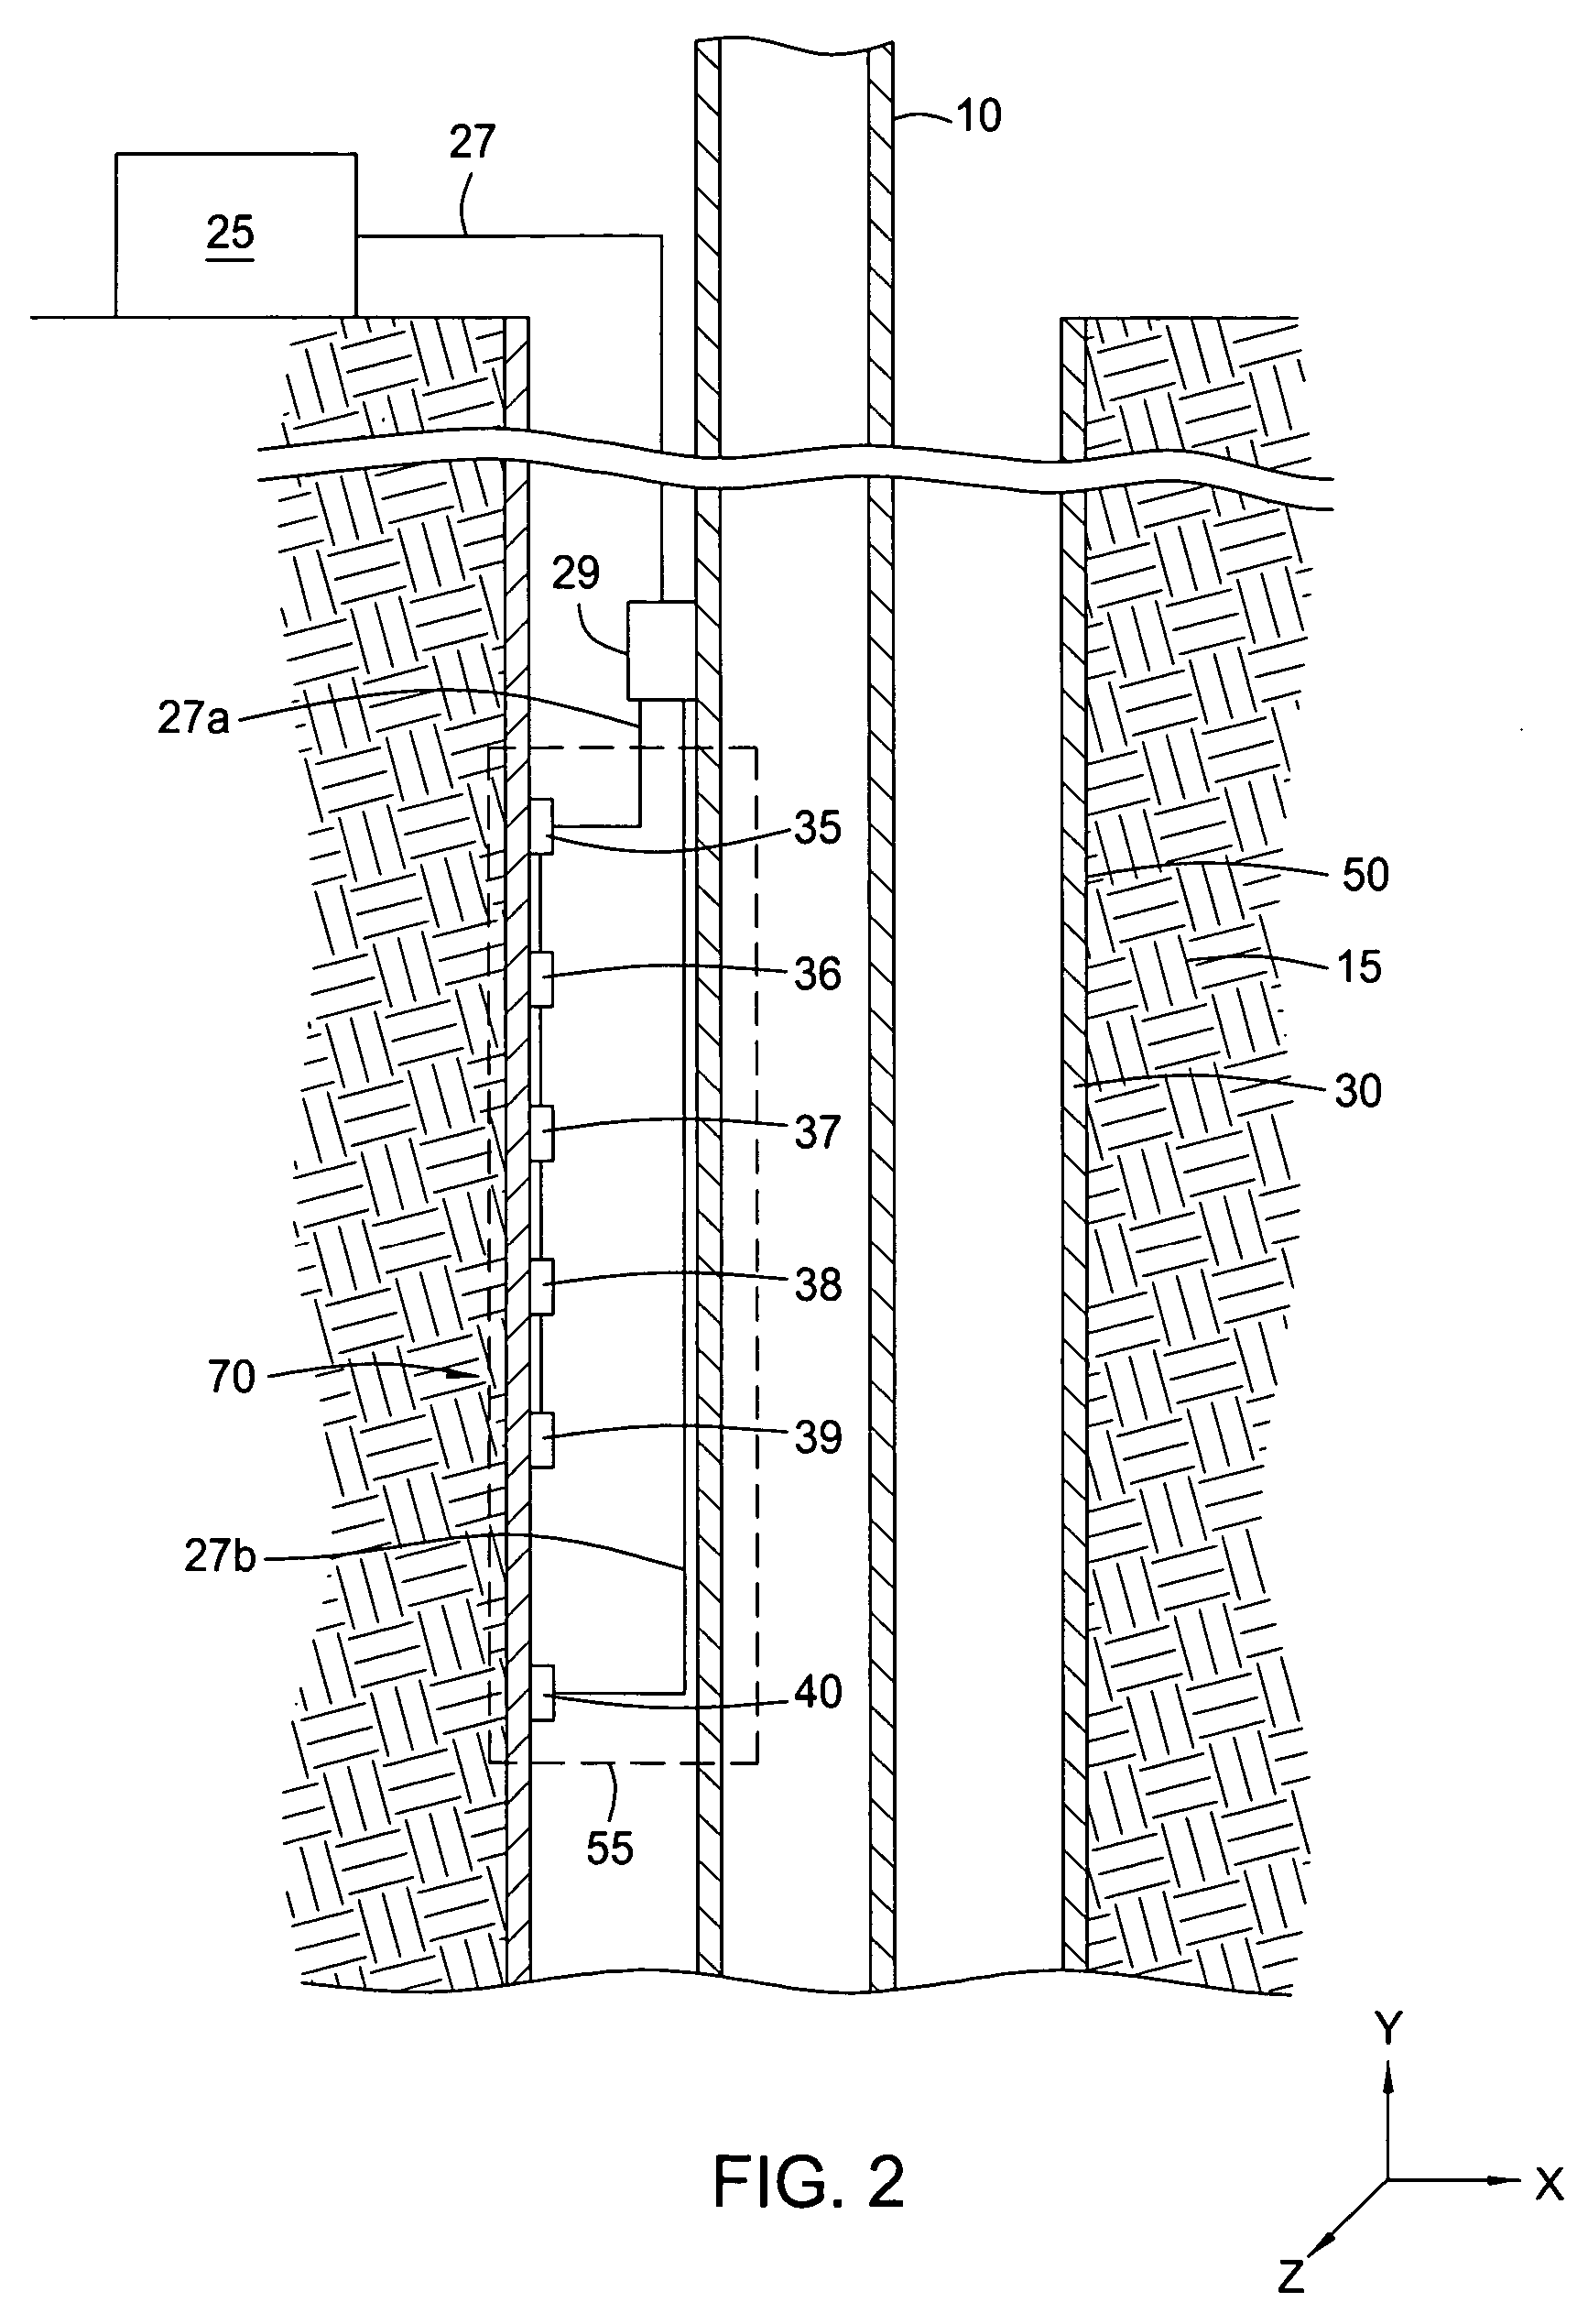 Permanently installed in-well fiber optic accelerometer-based seismic sensing apparatus and associated method